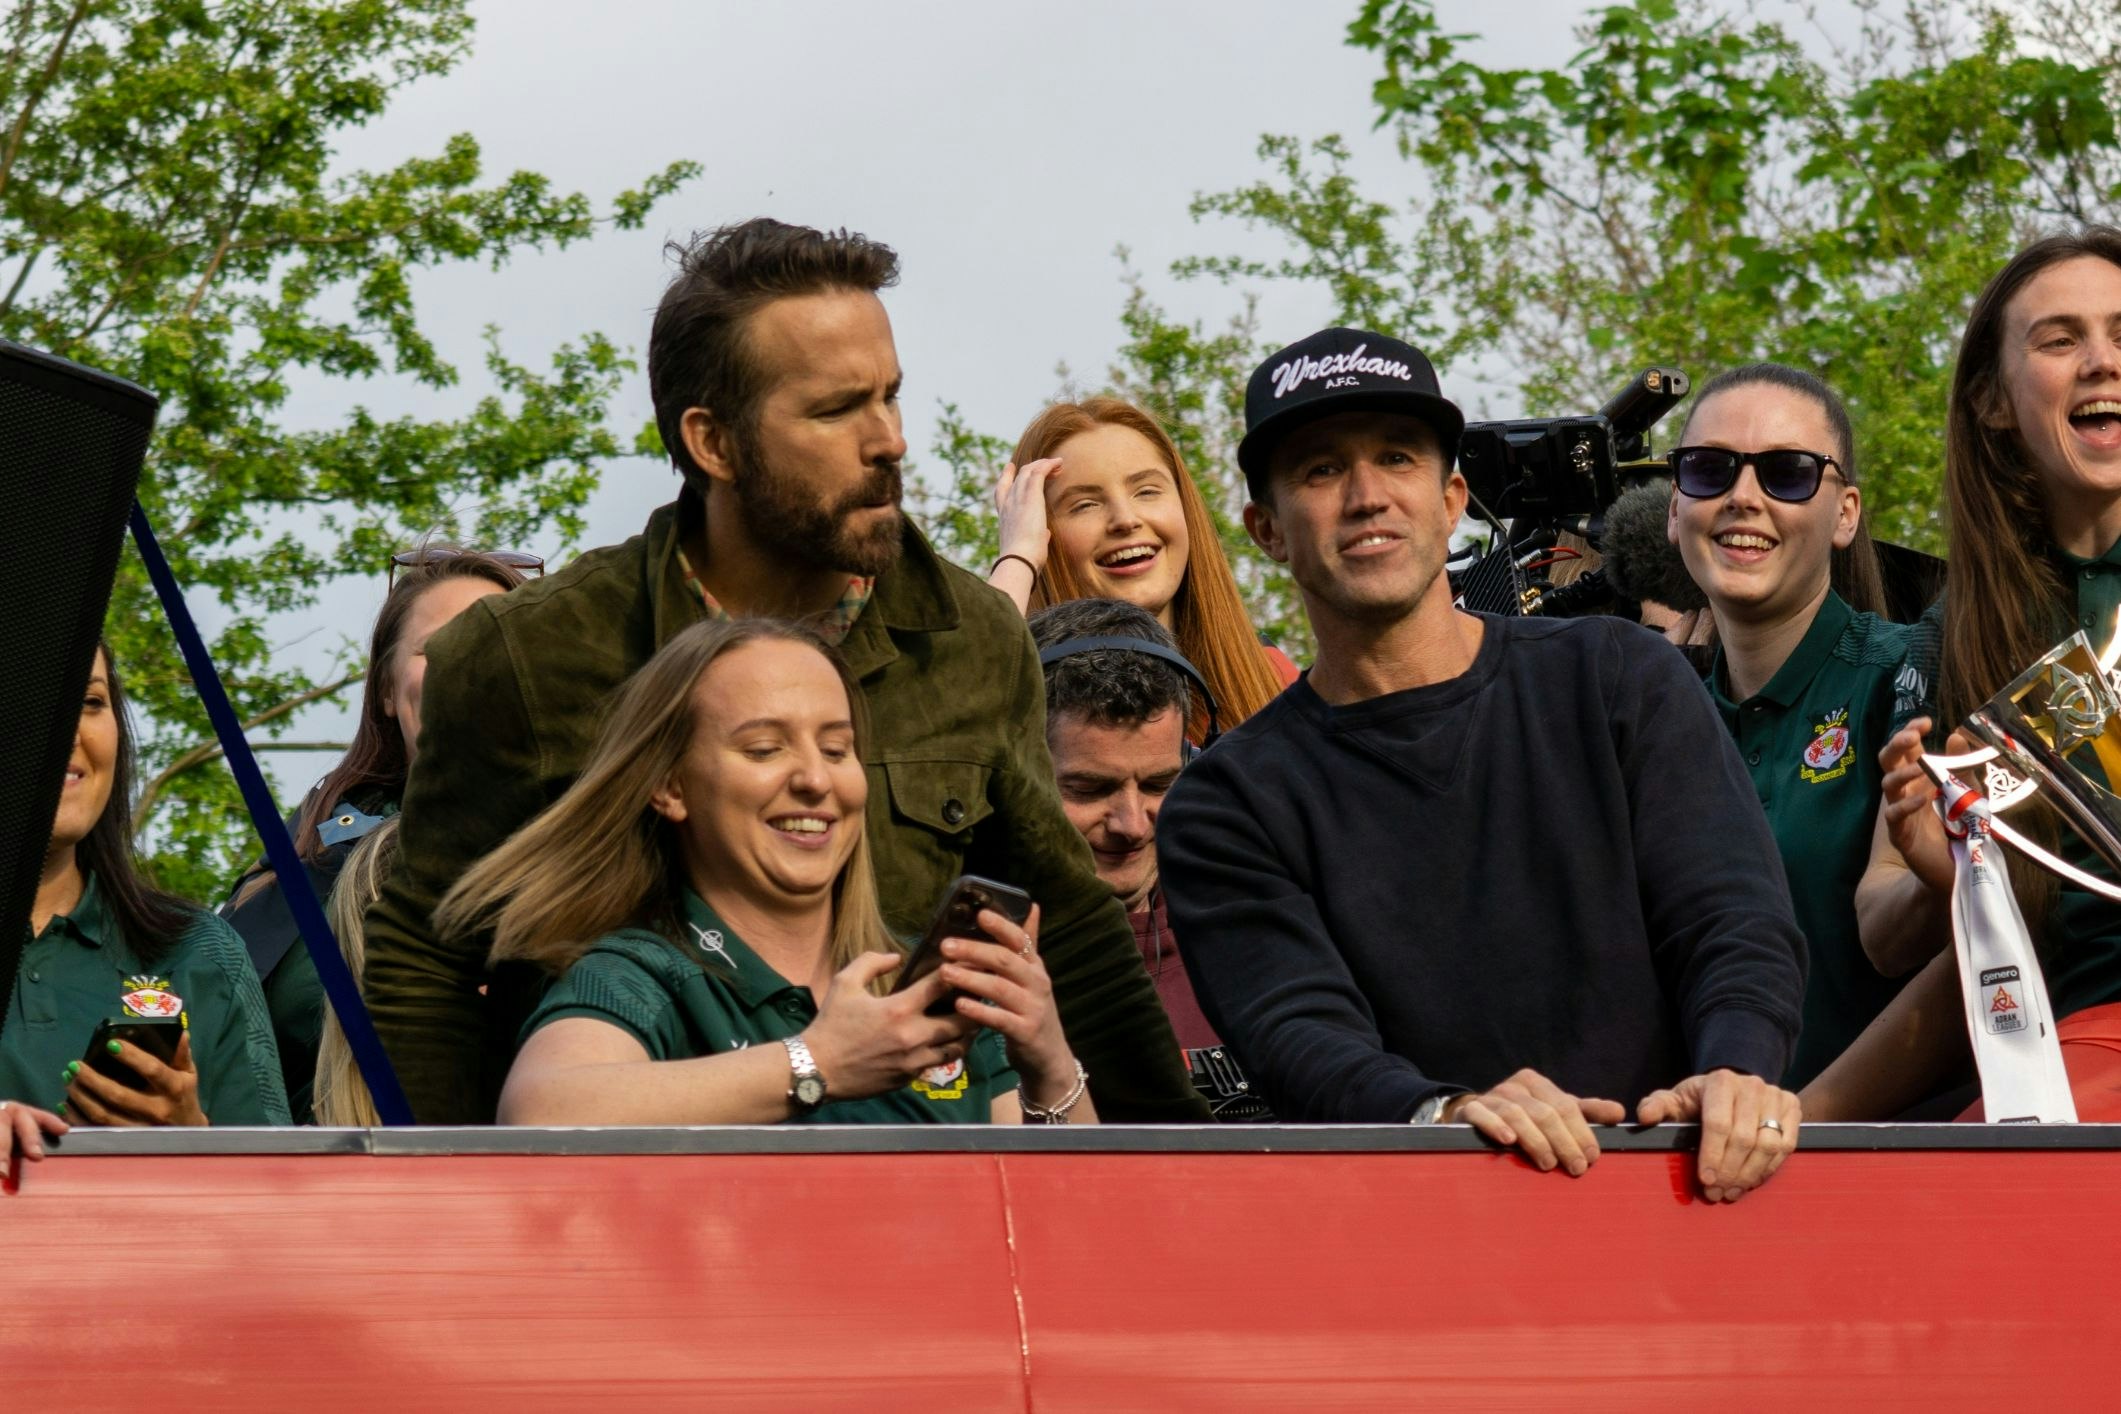 <p>It’s Always Sunny in Philadelphia actor Rob McElhenney, 46 [right], and Deadpool star Ryan Reynolds, 46 [left], are co-owners of Wrexham Football Club, with the documentary Welcome to Wrexham (2022) available to stream on Disney+. [Source: WXM Photography]</p>
